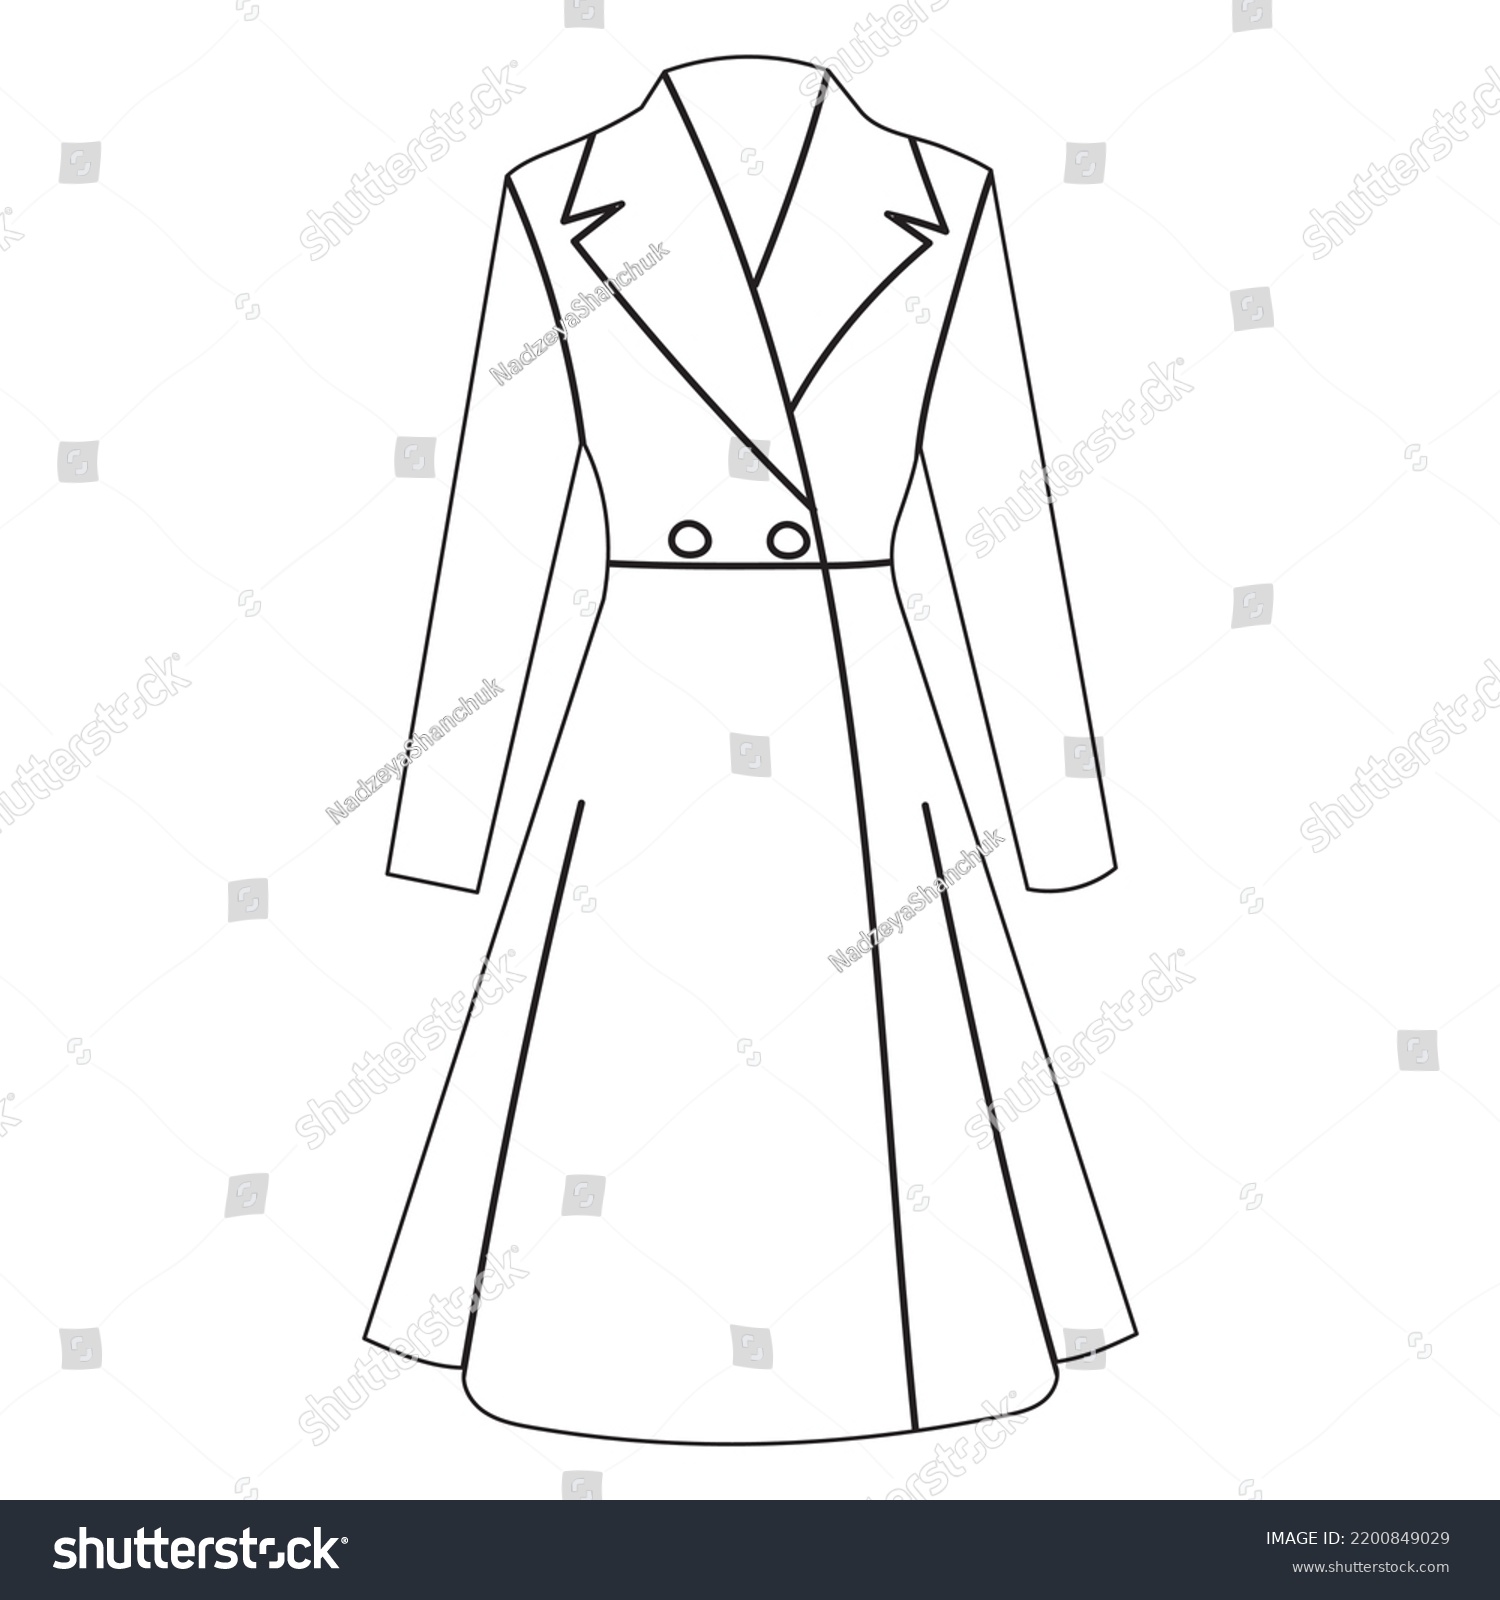 Raincoat Sketch Outline Isolated Vector Stock Vector (Royalty Free ...